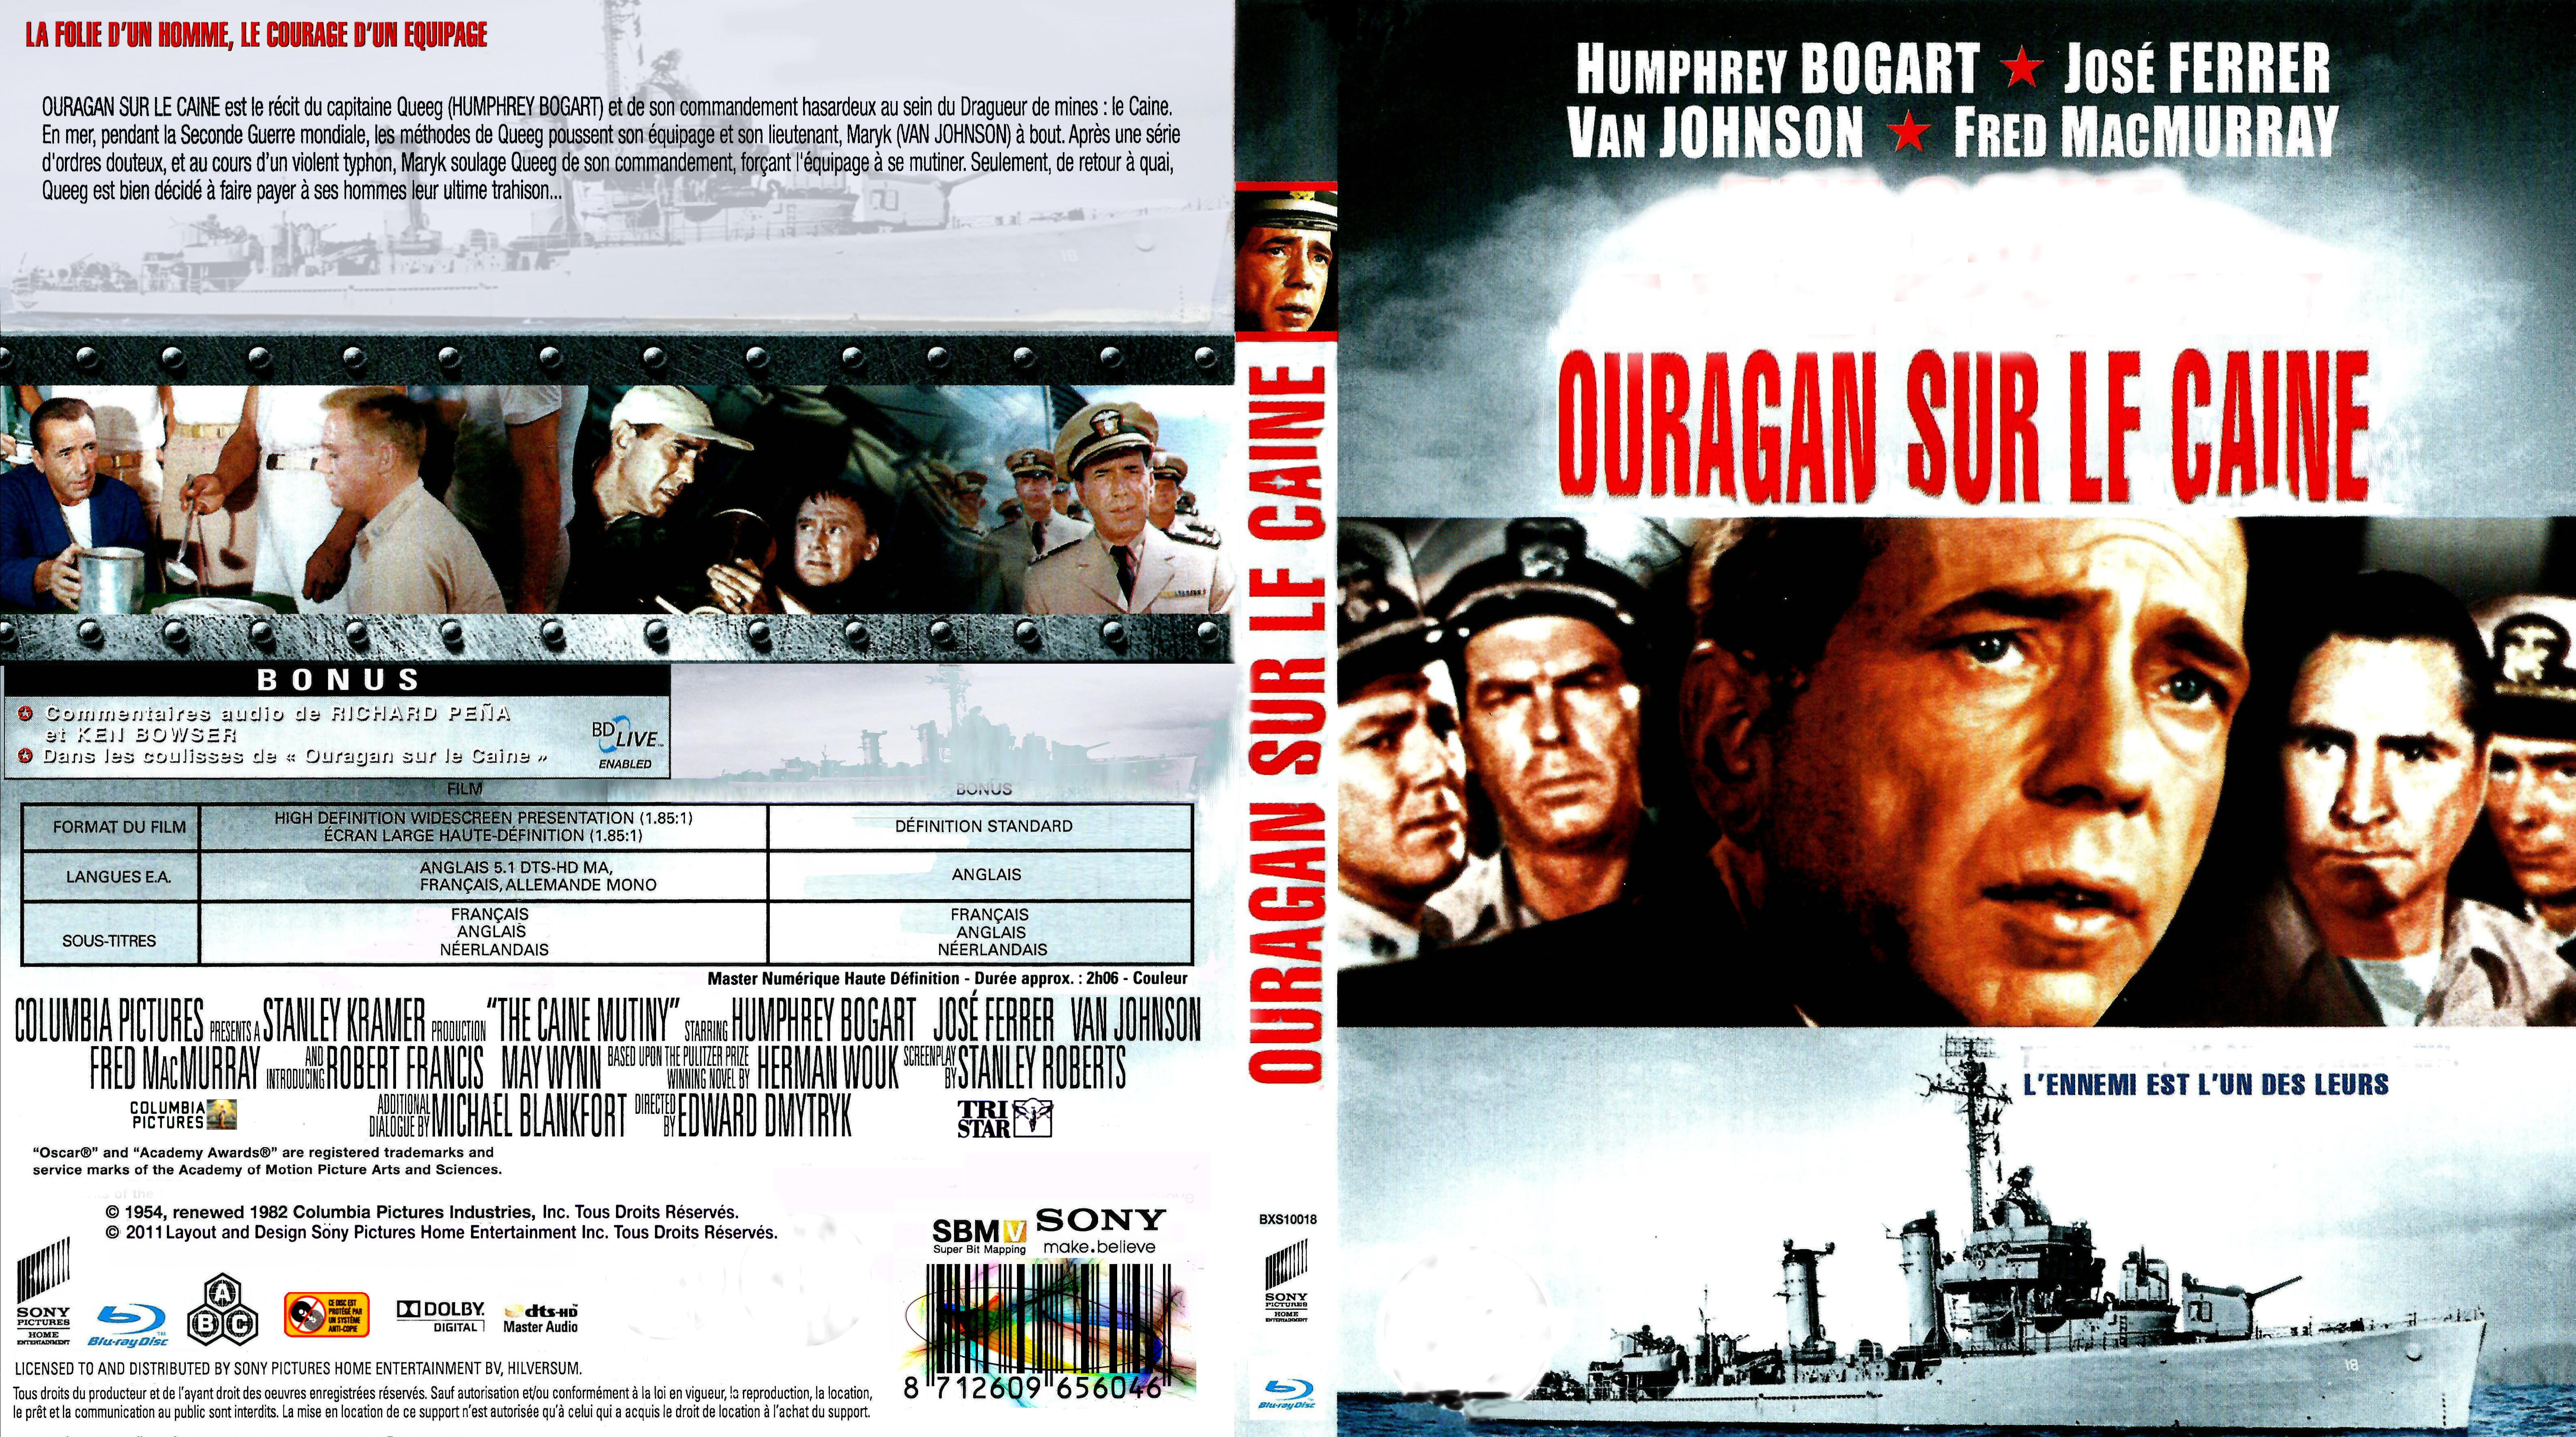 Jaquette DVD Ouragan sur le caine custom (BLU-RAY)